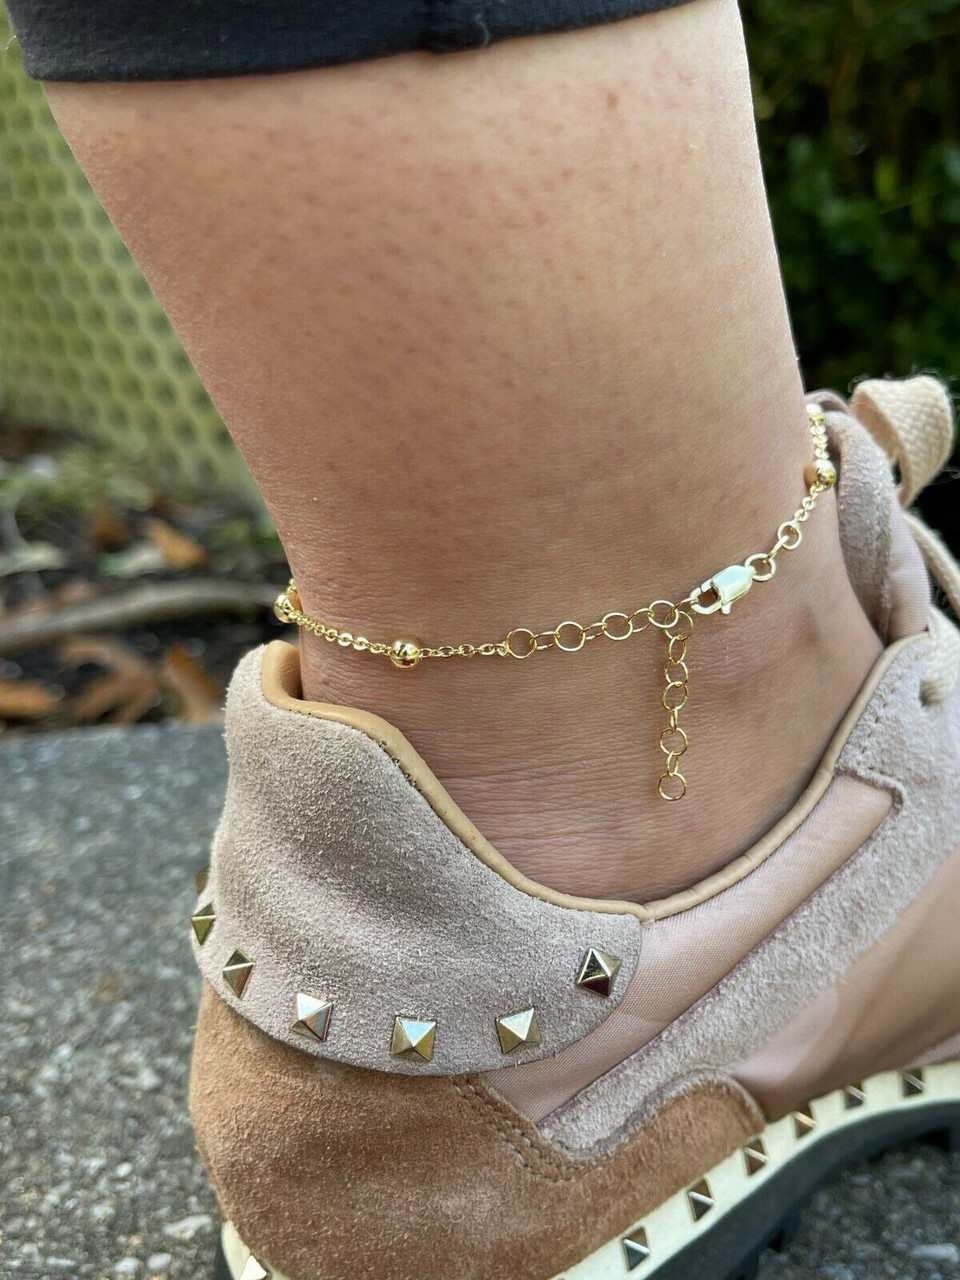 Huitan Temperament Sweet Girls Thin Anklet Bracelet with Brilliant CZ  Summer Beach Ankle Leg Chain for Women Barefoot Jewelry